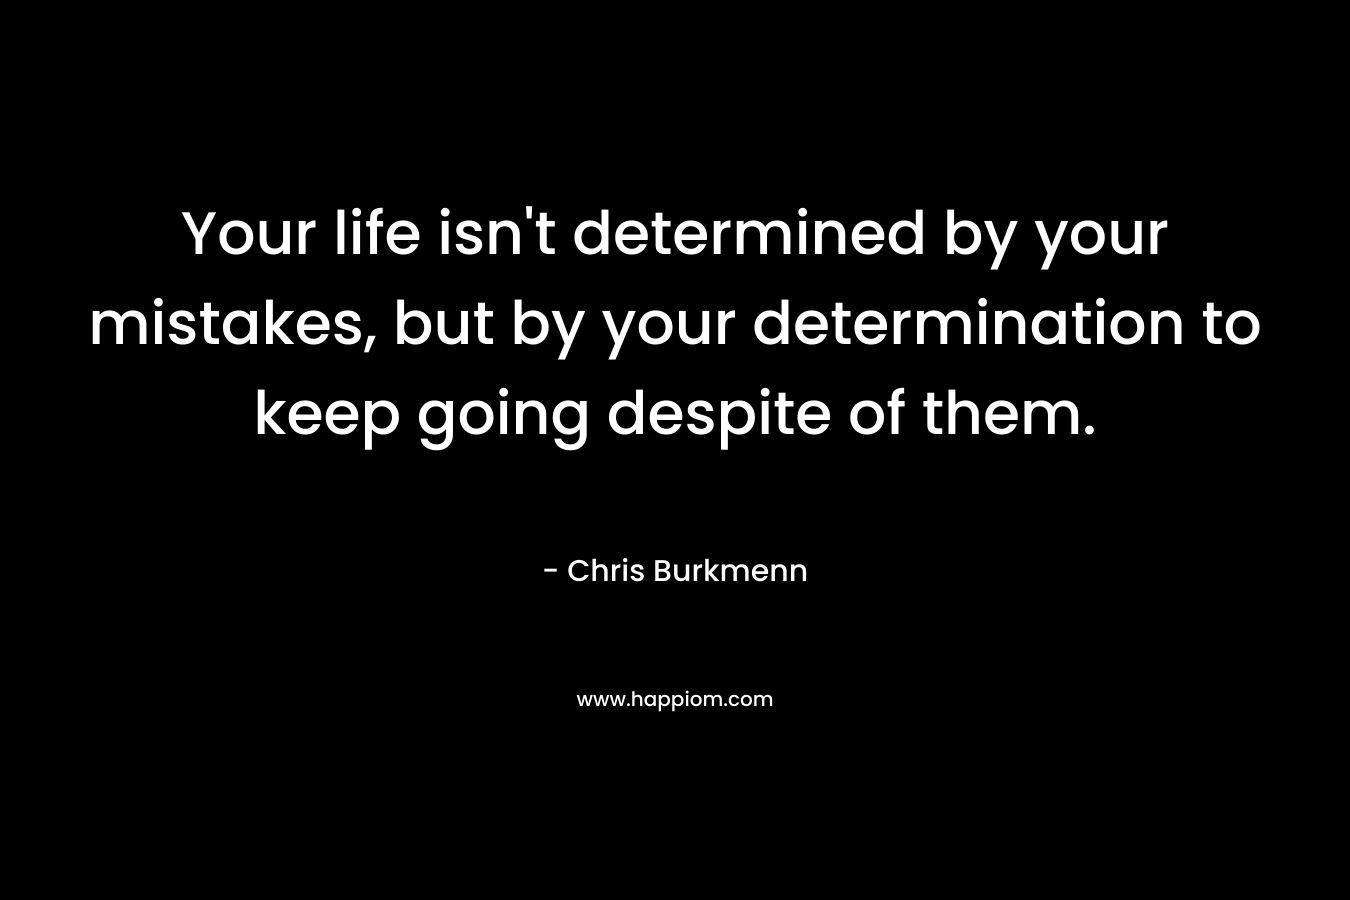 Your life isn’t determined by your mistakes, but by your determination to keep going despite of them. – Chris Burkmenn